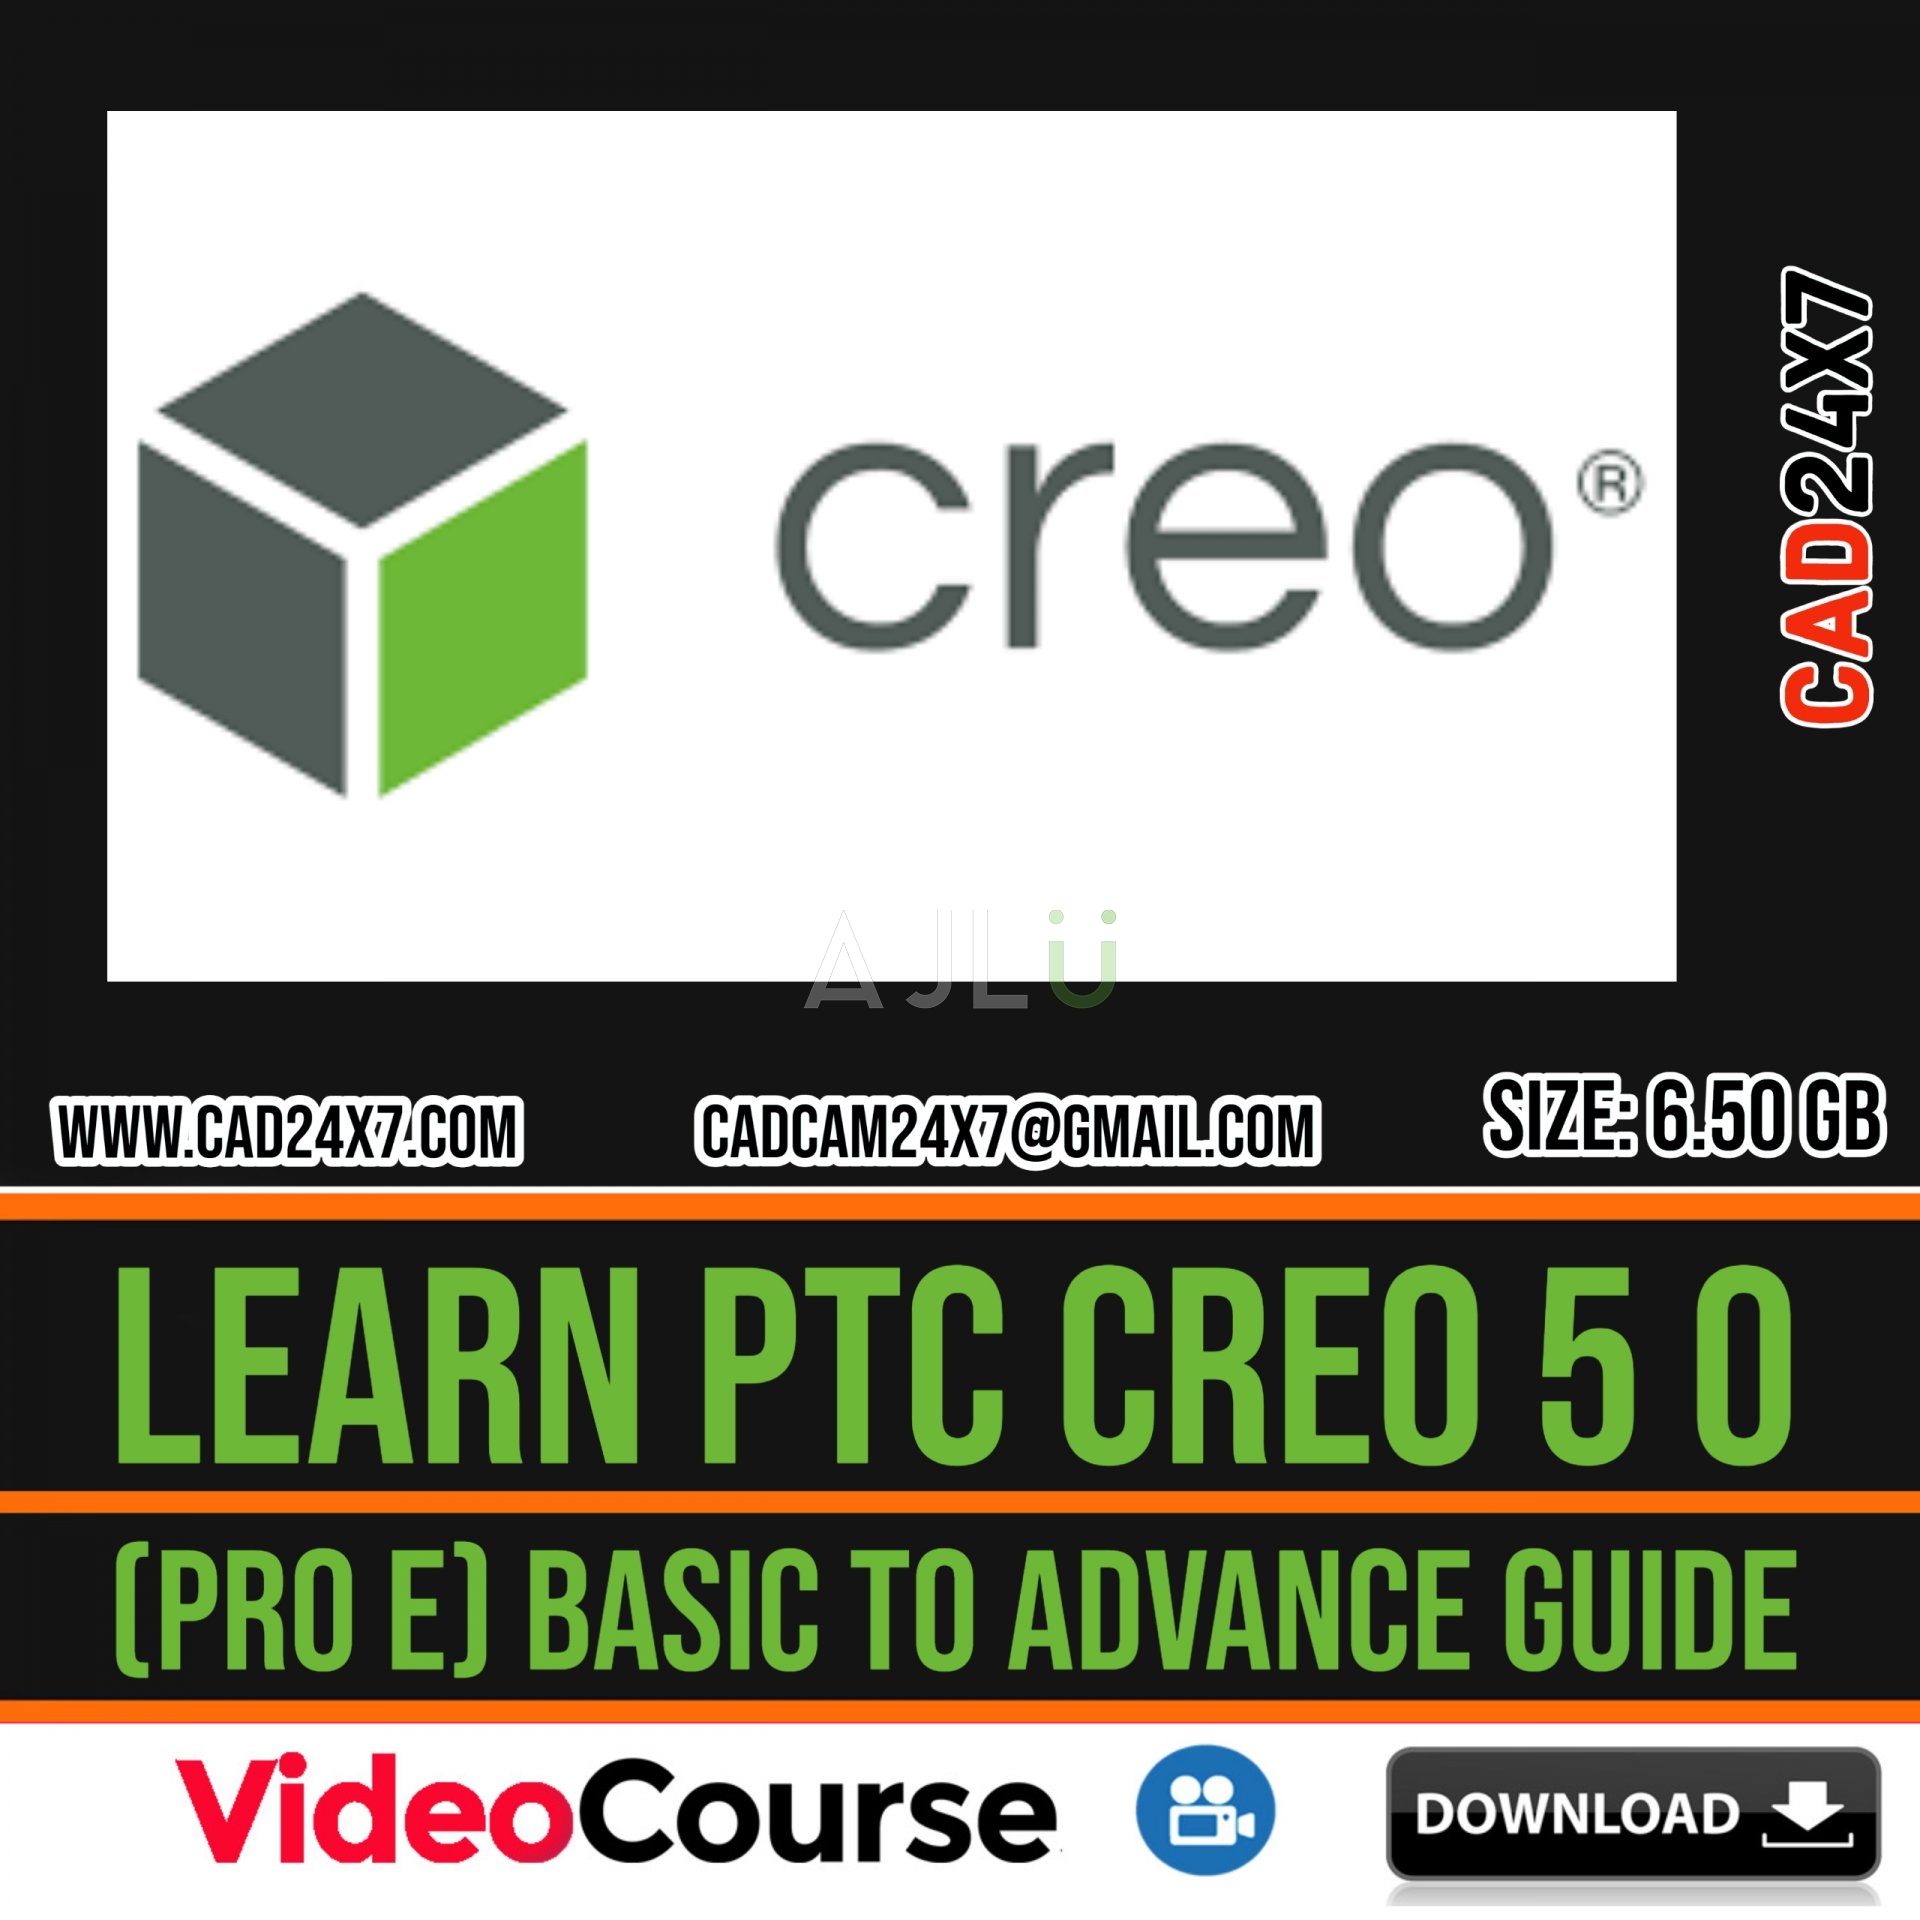 Learn PTC Creo 5 0 (Pro e) Basic to Advance Guide - Freelance Marketplace  to buy, sell and auction domains, websites, apps, videos, graphic designs,  photos, codes, games, software, animation, digital art,